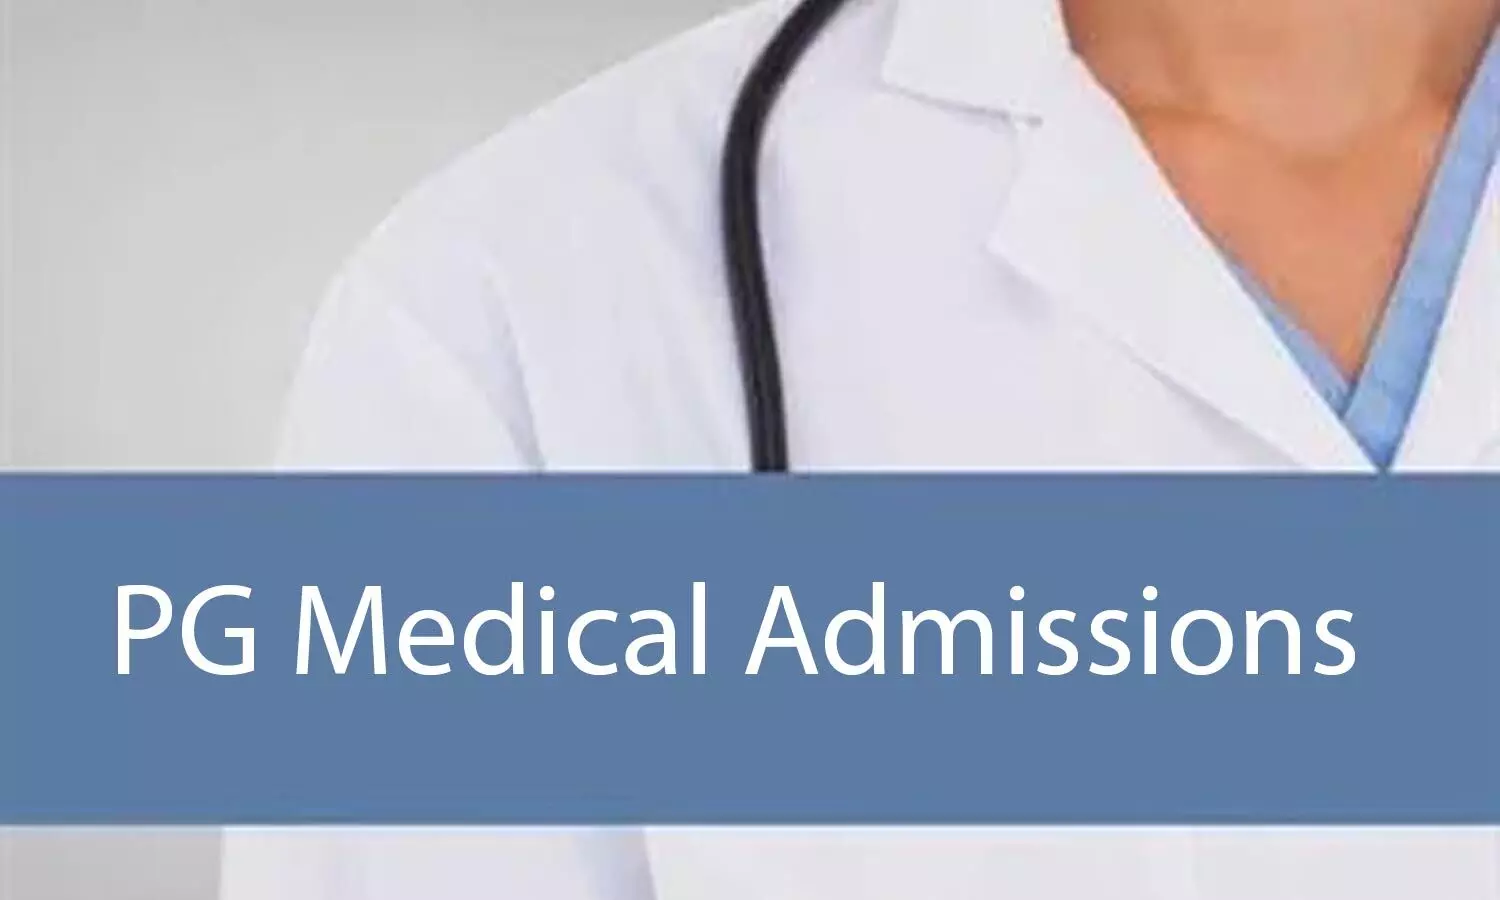 INI-CET 2020: AIIMS issues notice on inclusion of states for domicile category for admission at NIMHANS